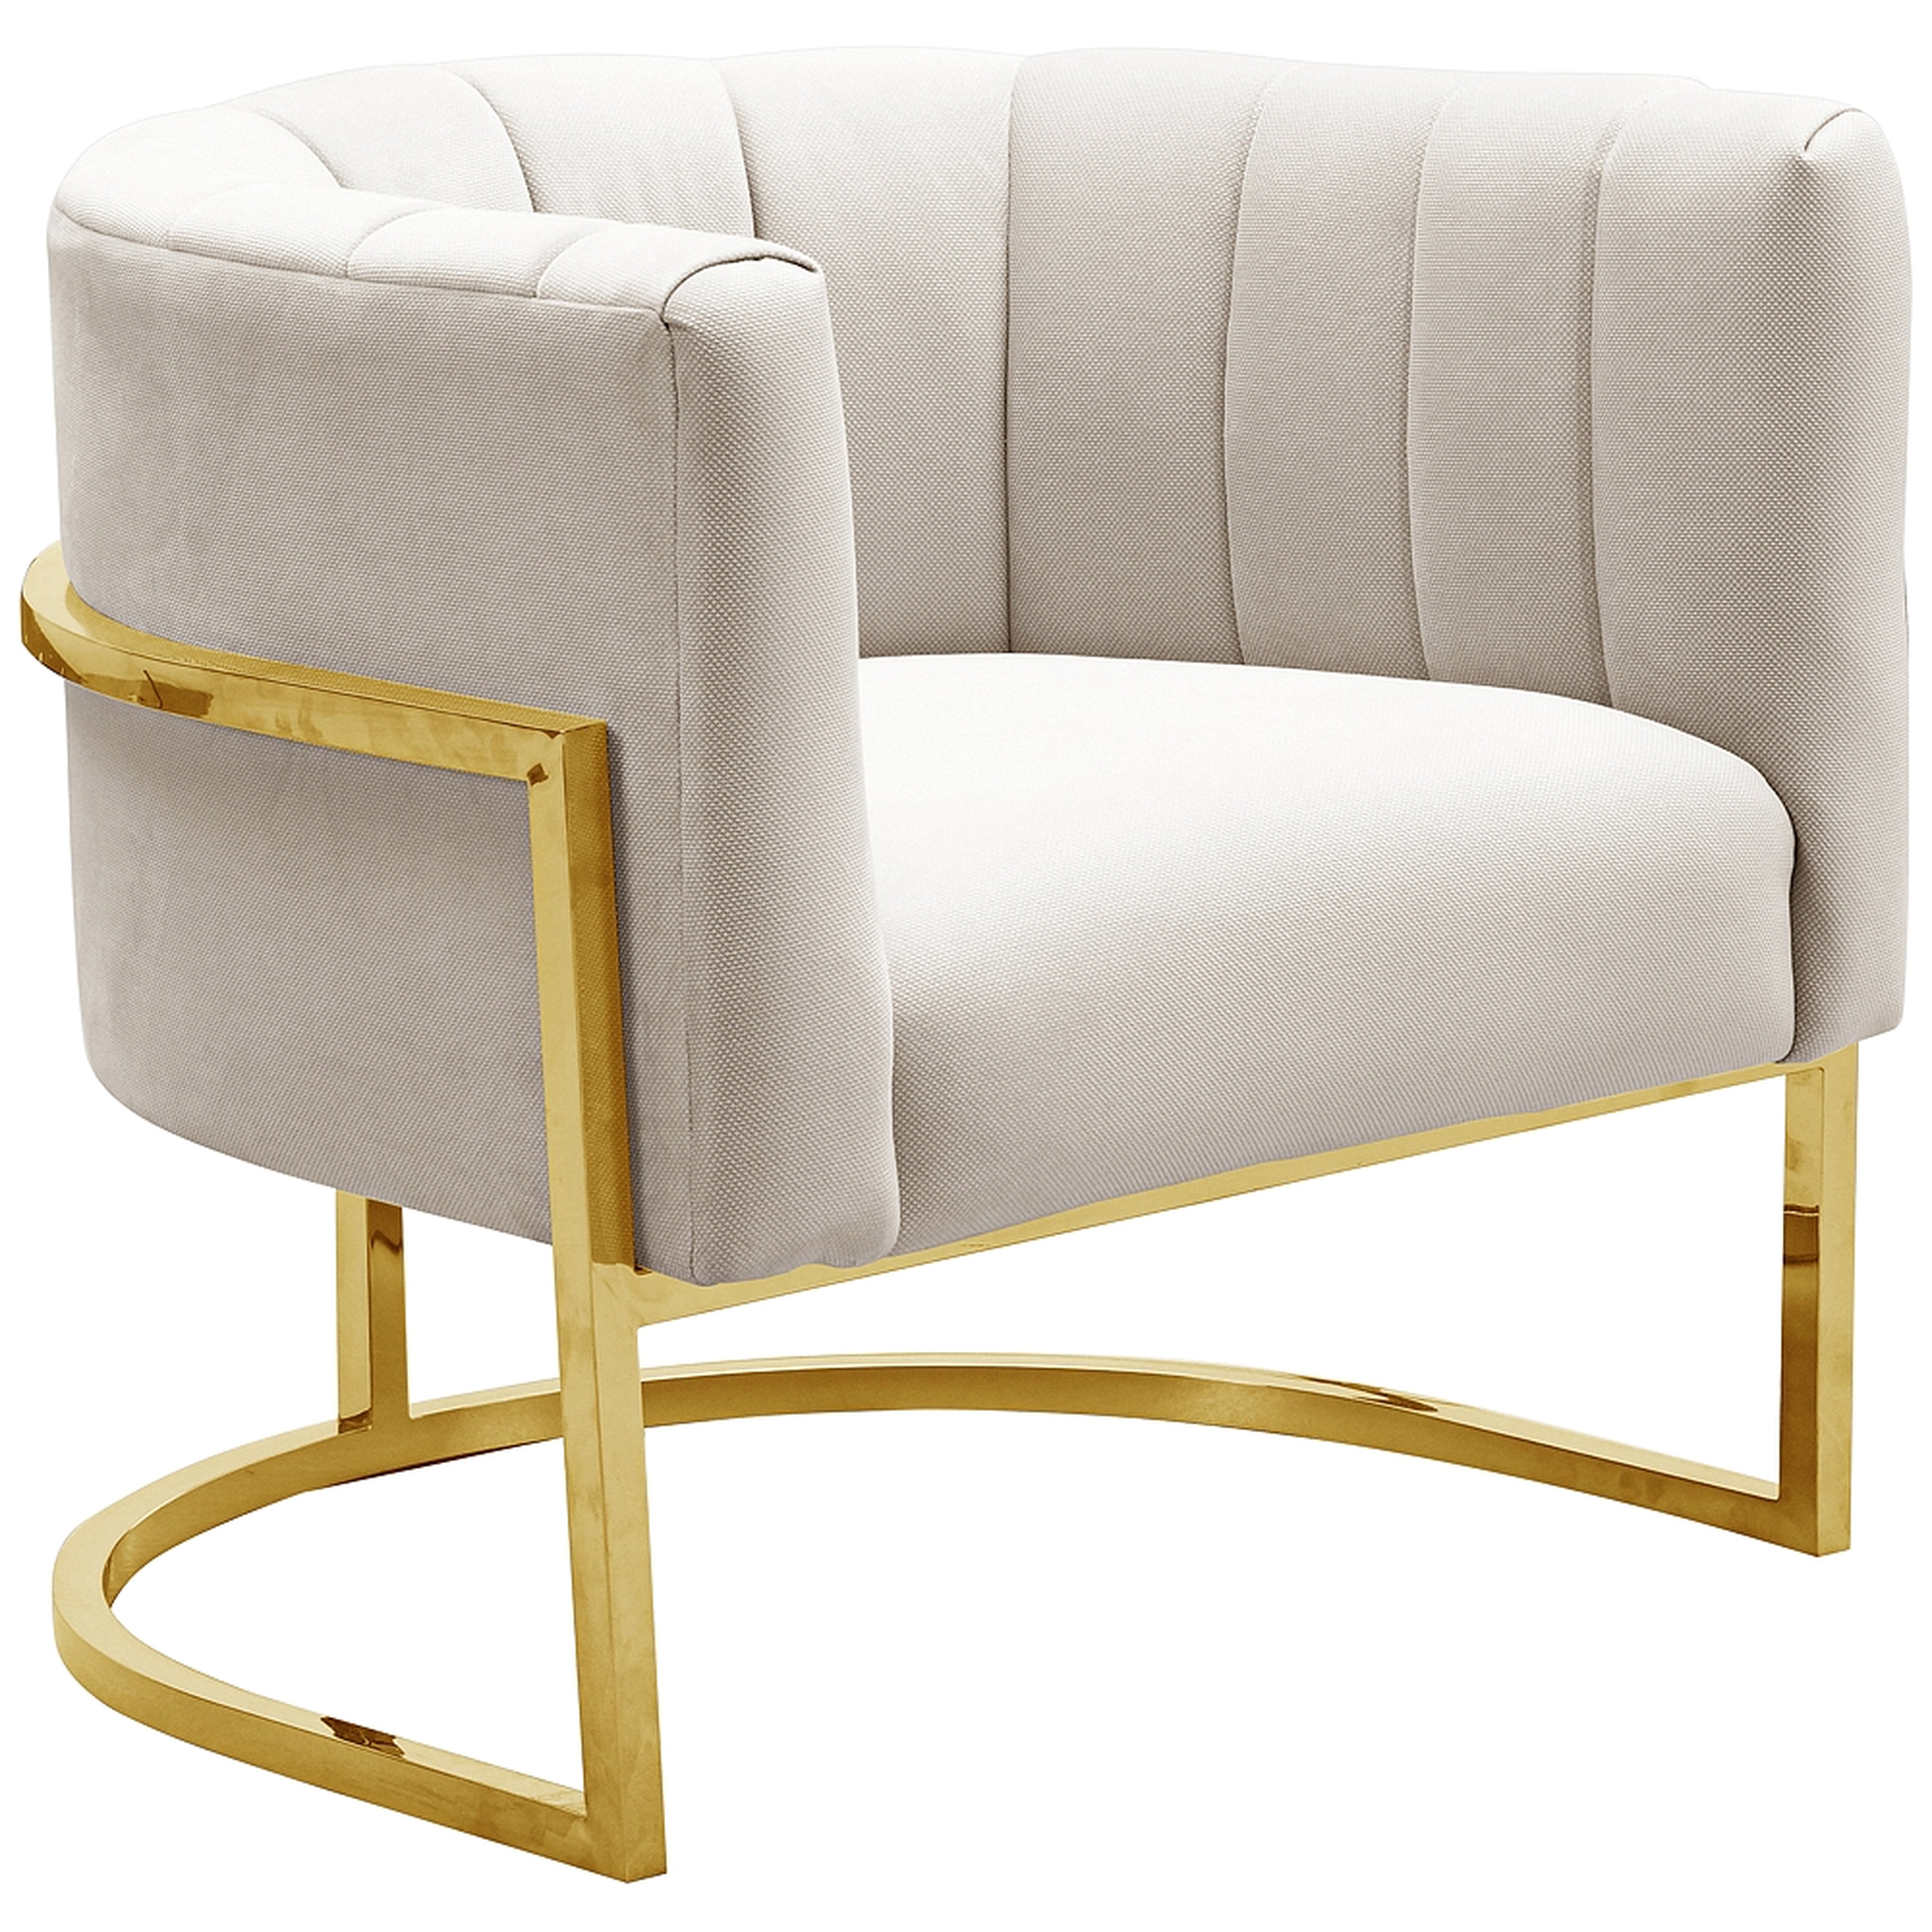 Magnolia Spotted Cream Velvet and Gold Armchair - Style # 58T63 - Lamps Plus